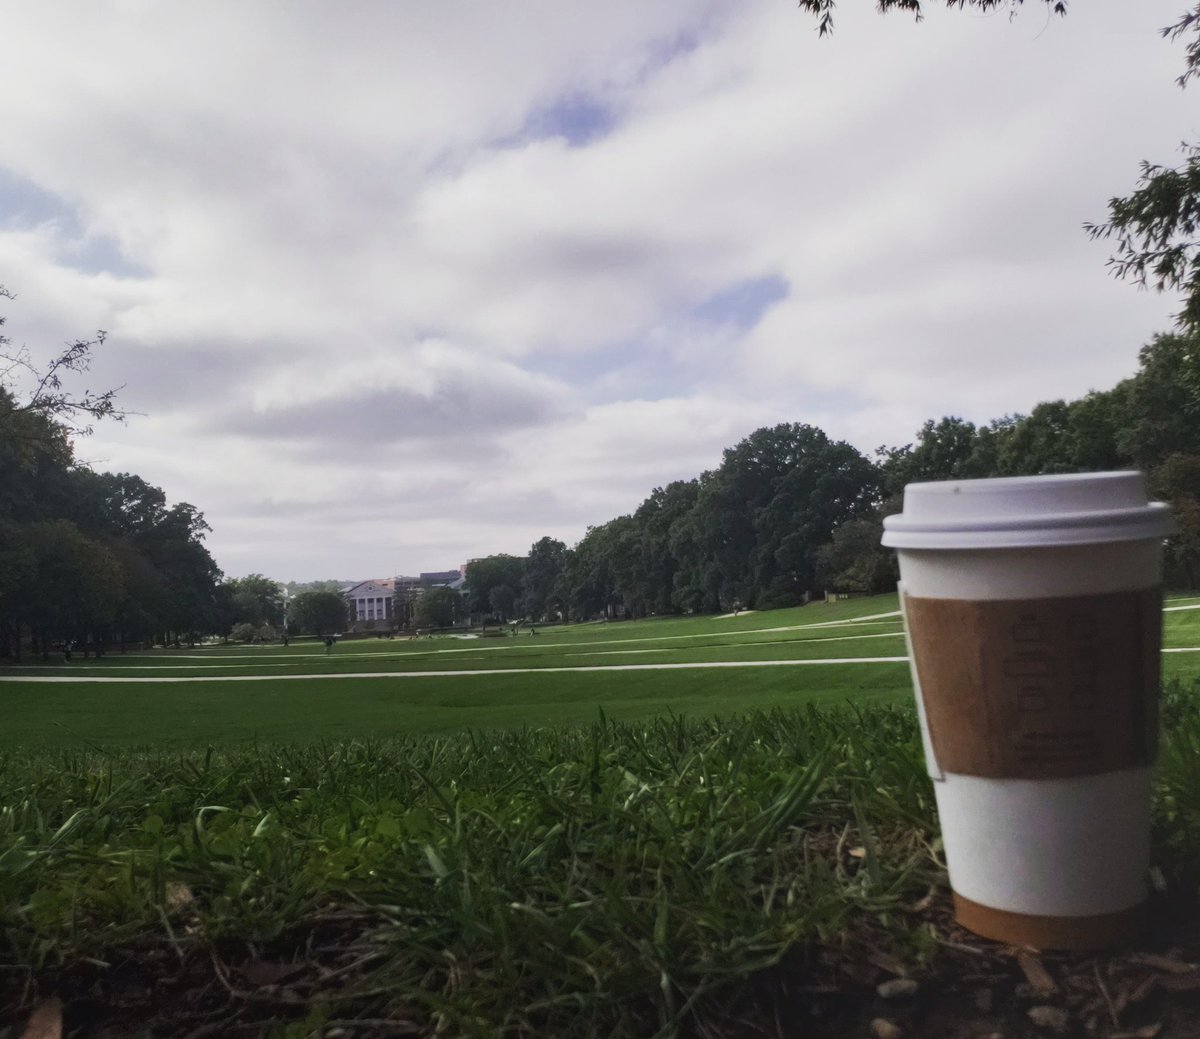 Mr. Coffee enjoying a gorgeous campus morning at the University of Maryland today! 😍☕

#APAN #welovedata #welovecoffee #happycoffeeday #UMD